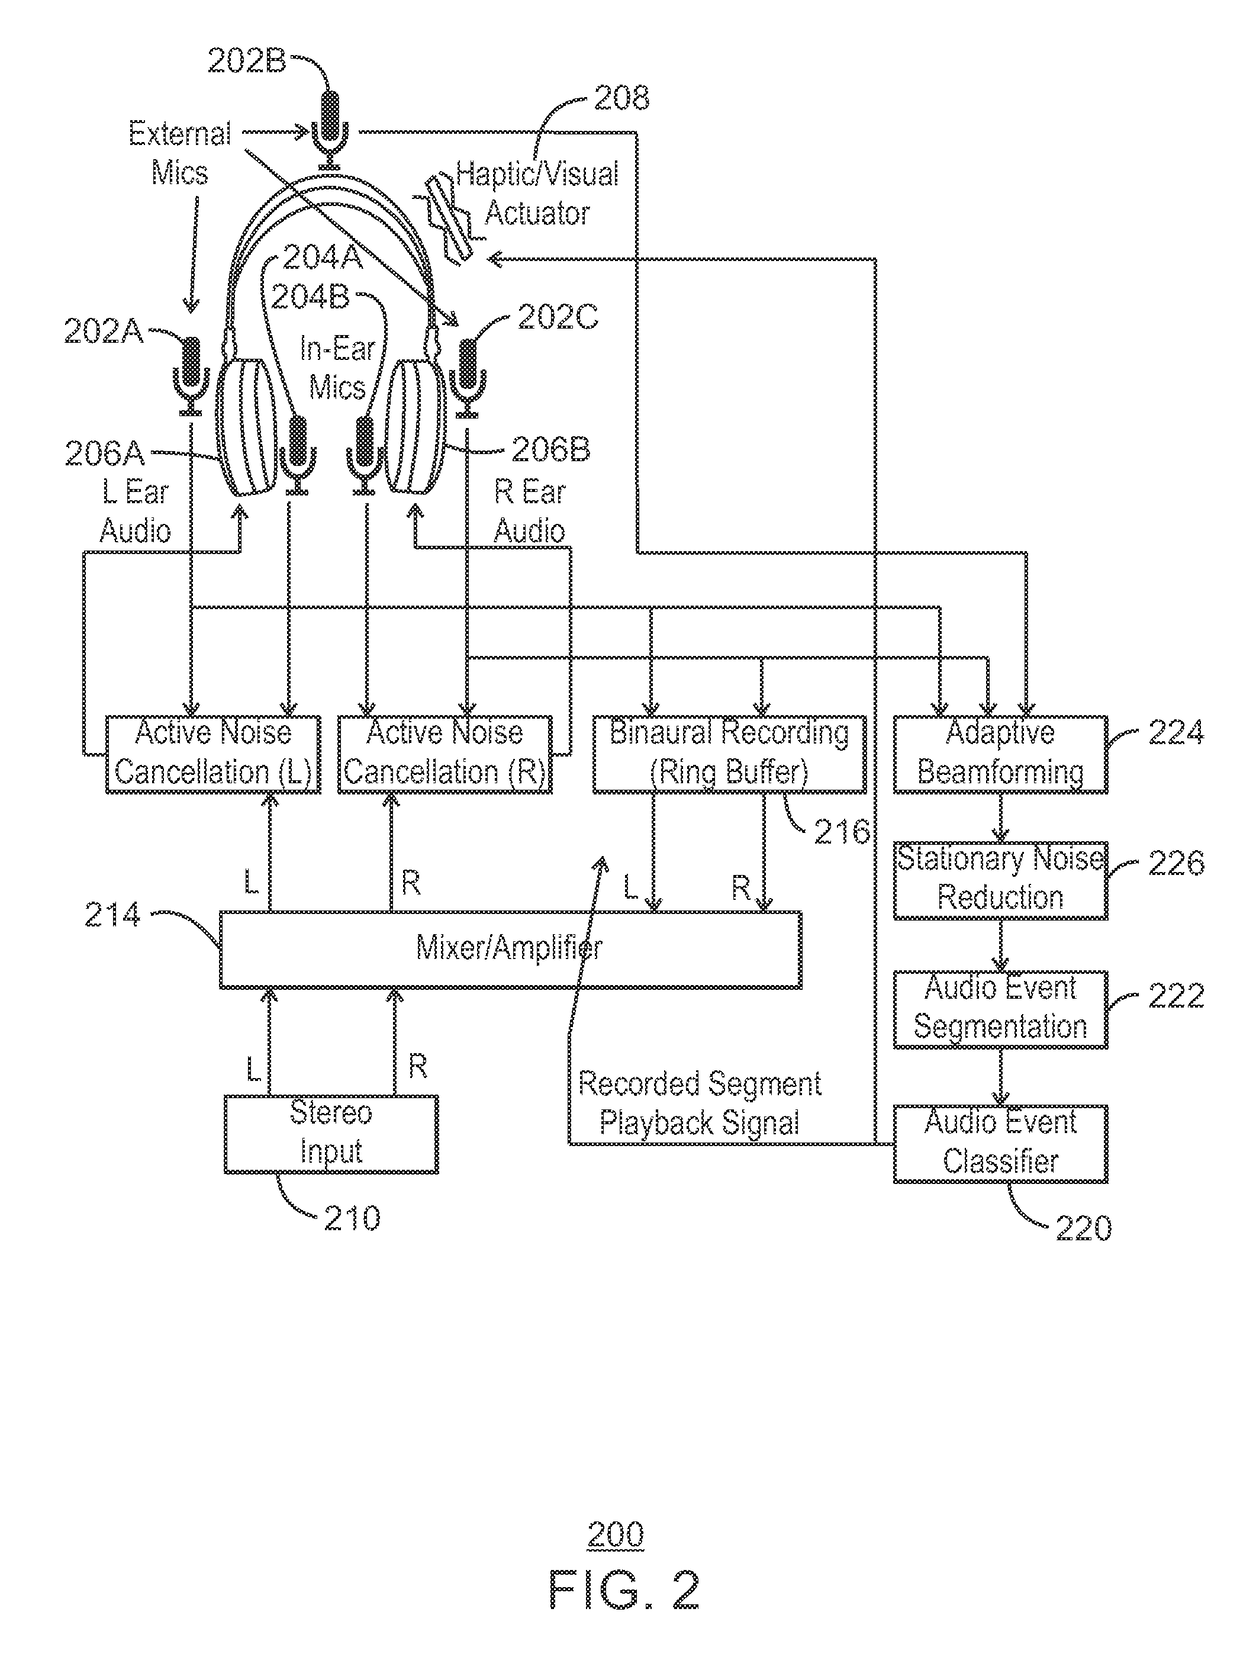 Binaural recording for processing audio signals to enable alerts